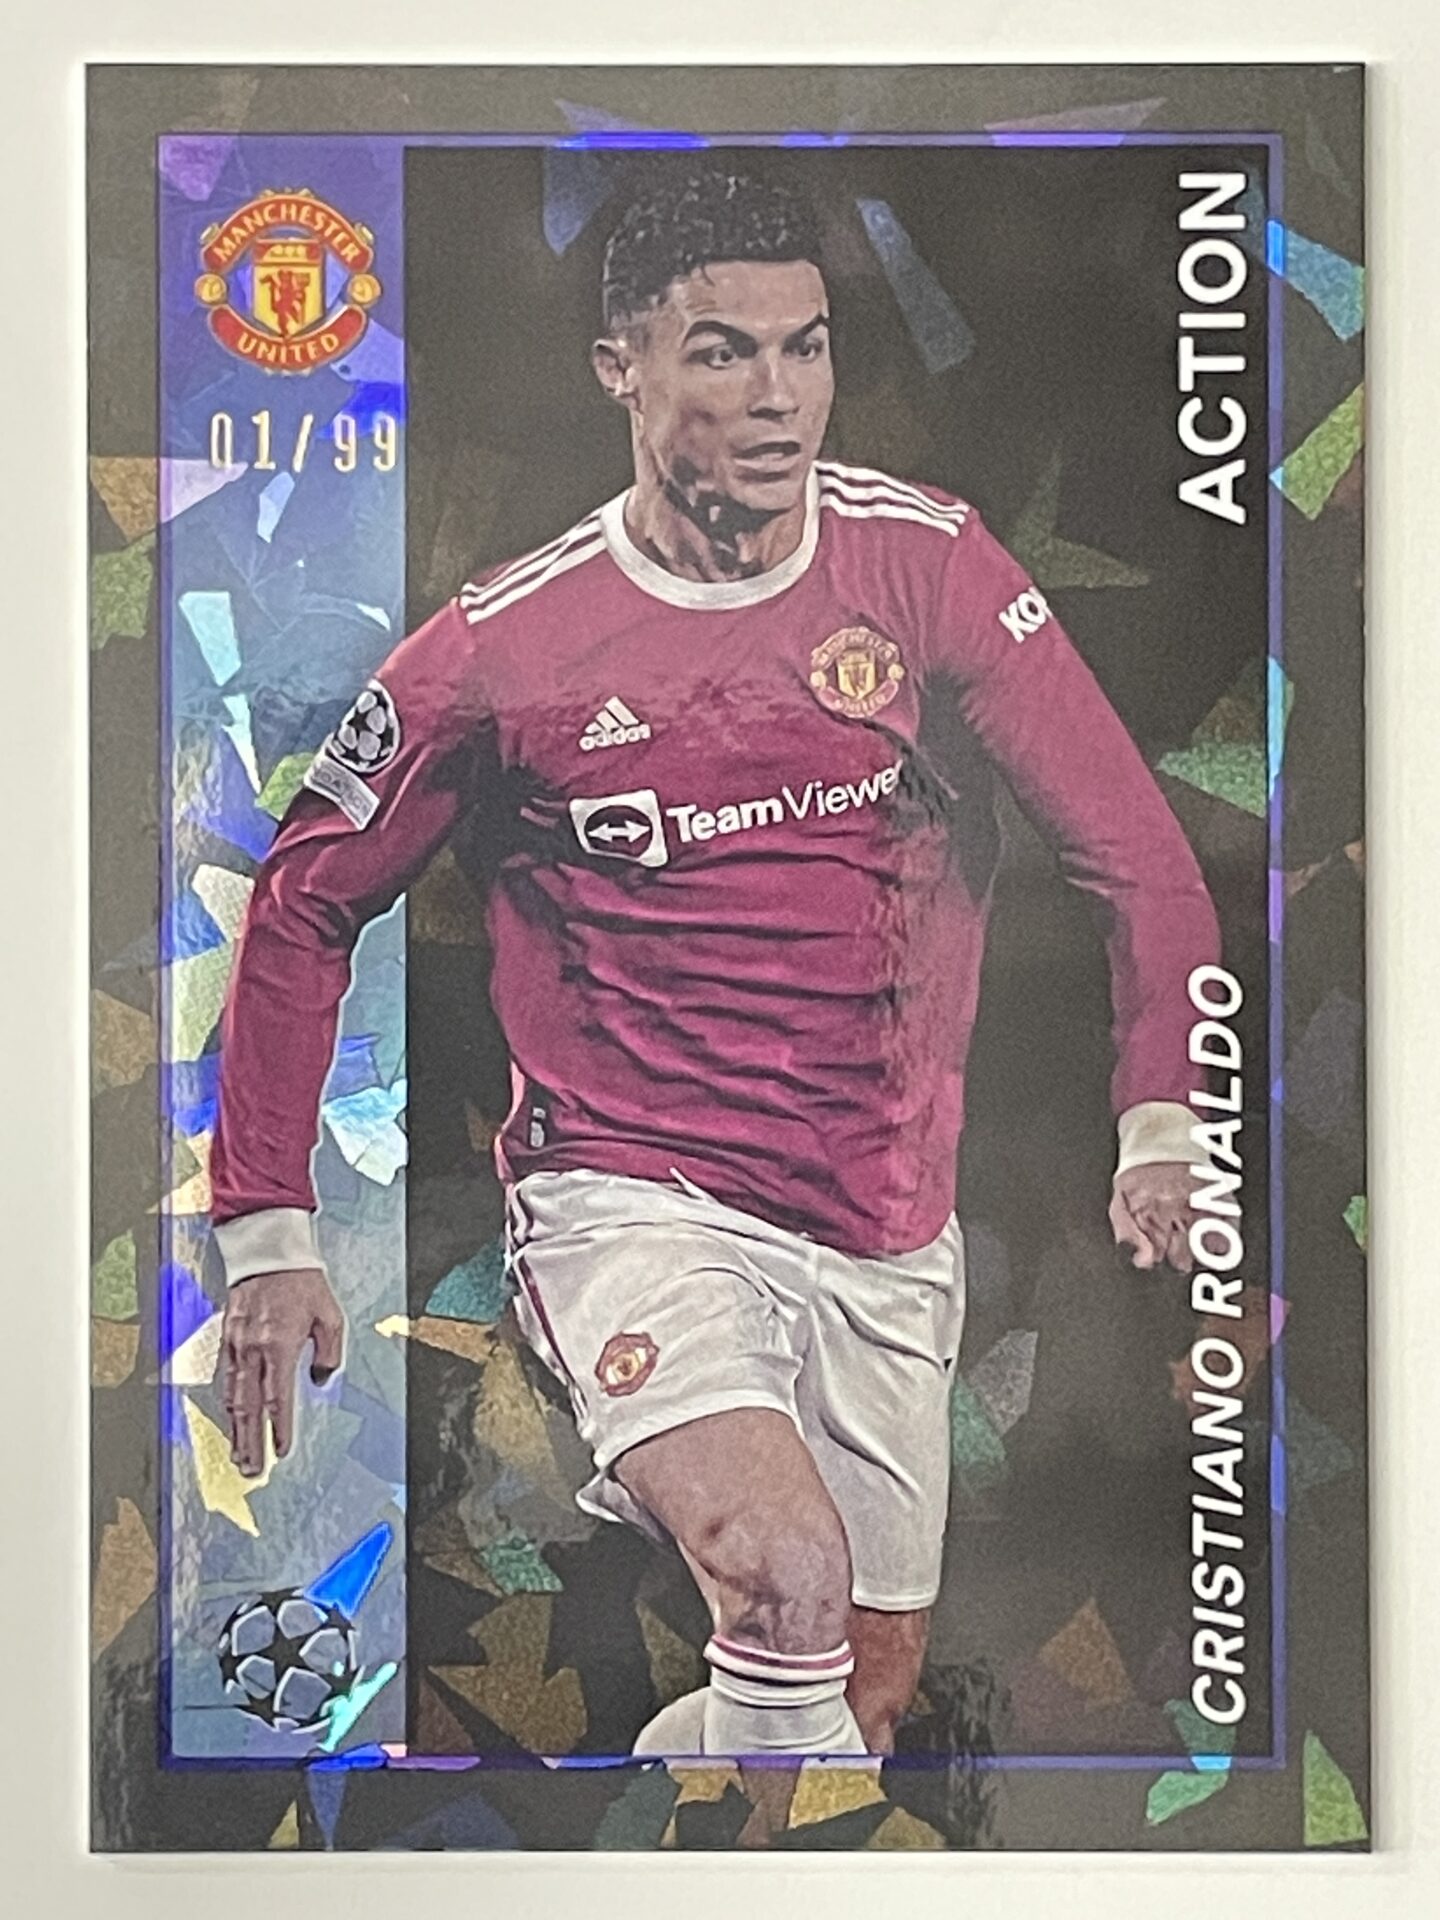 133 Cristiano Ronaldo Manchester United Action Parallel 01/99 Topps Merlin  Heritage 97 UEFA Champions League Hobby Card - Solve Collectibles